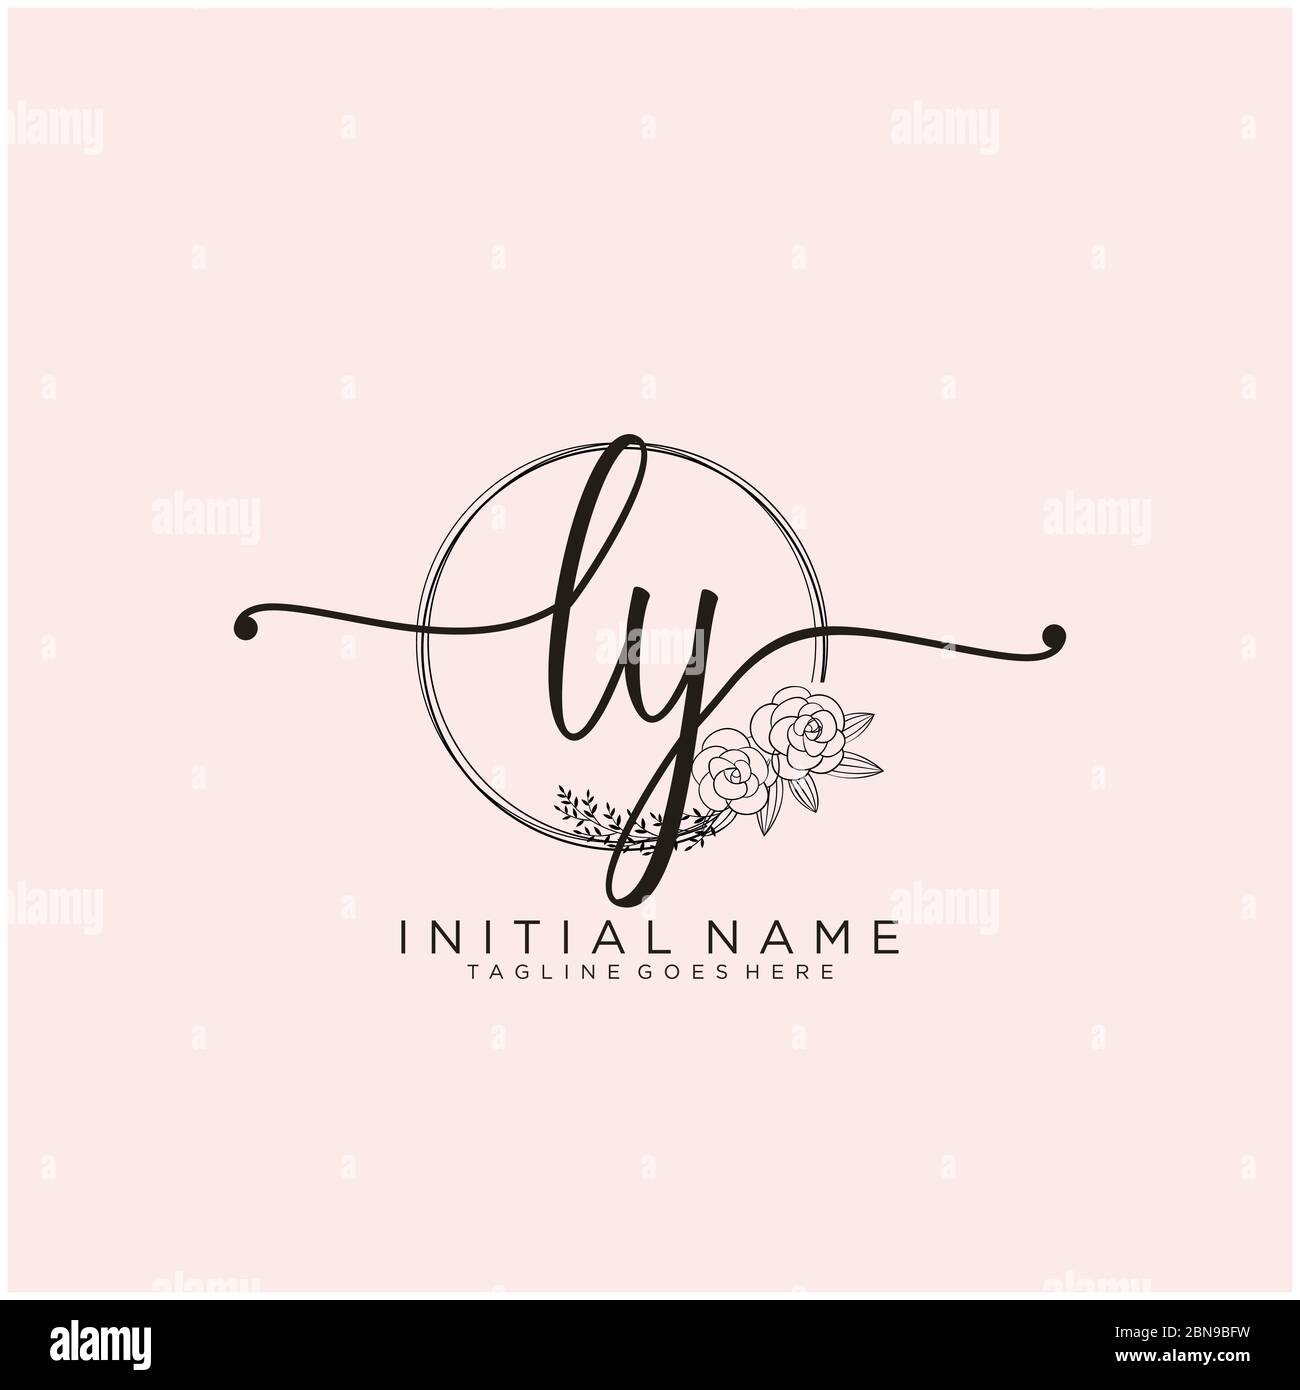 Premium Vector  Simple ly monogram logo suitable for any business